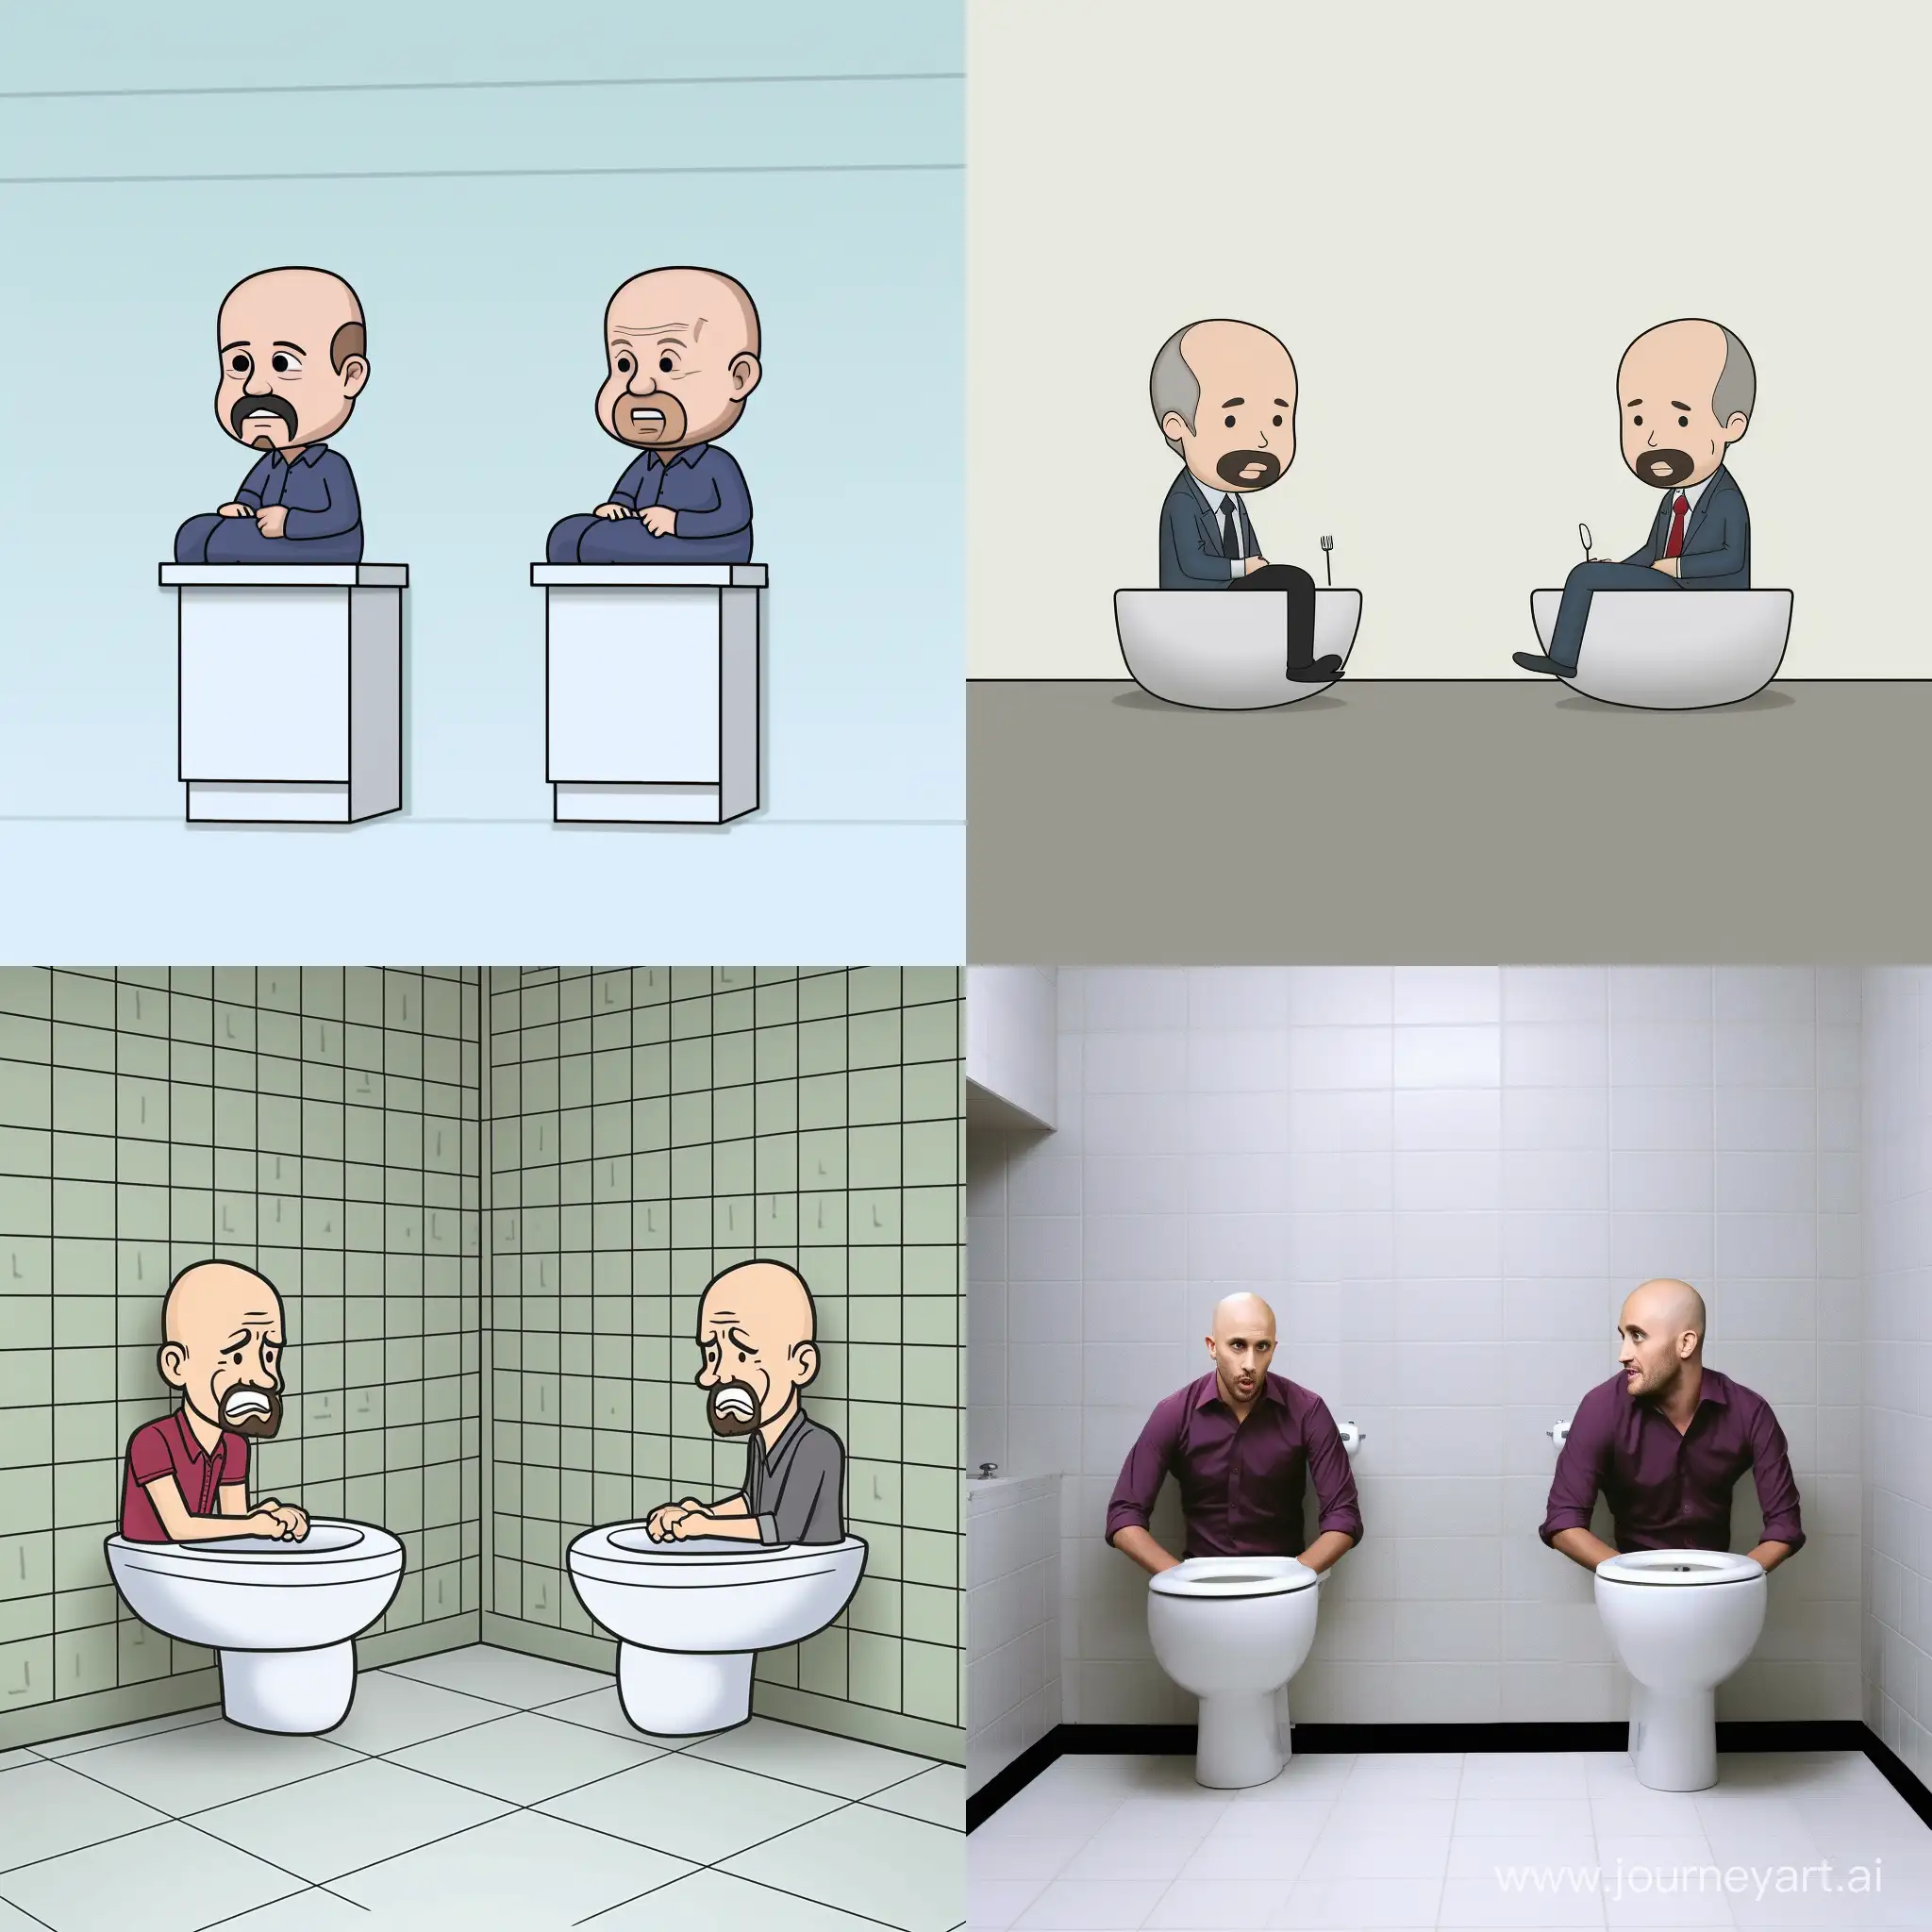 A funny comic picture about two guys who are sitting on toilets because they ate too much. the left guy is bald and the right guy is looking like ryan gosling